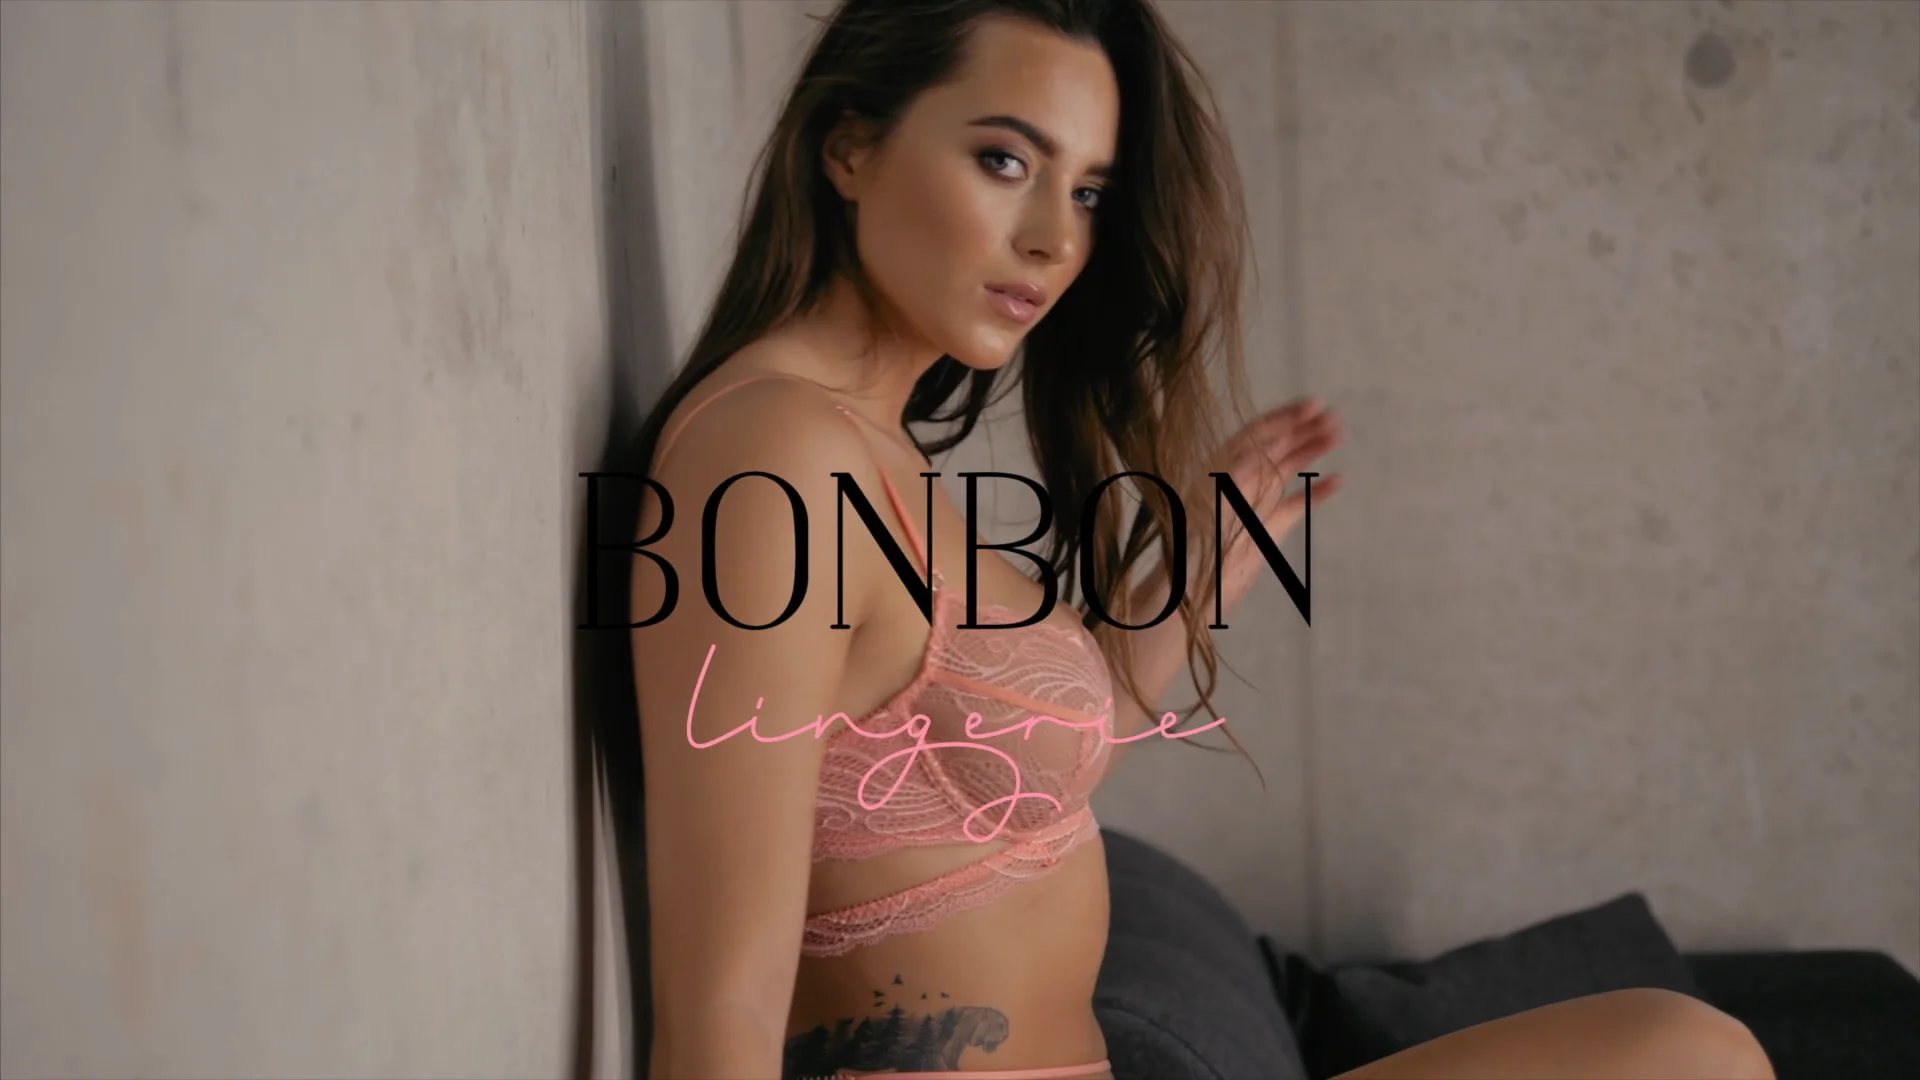 Stores and contact – BonBon Lingerie